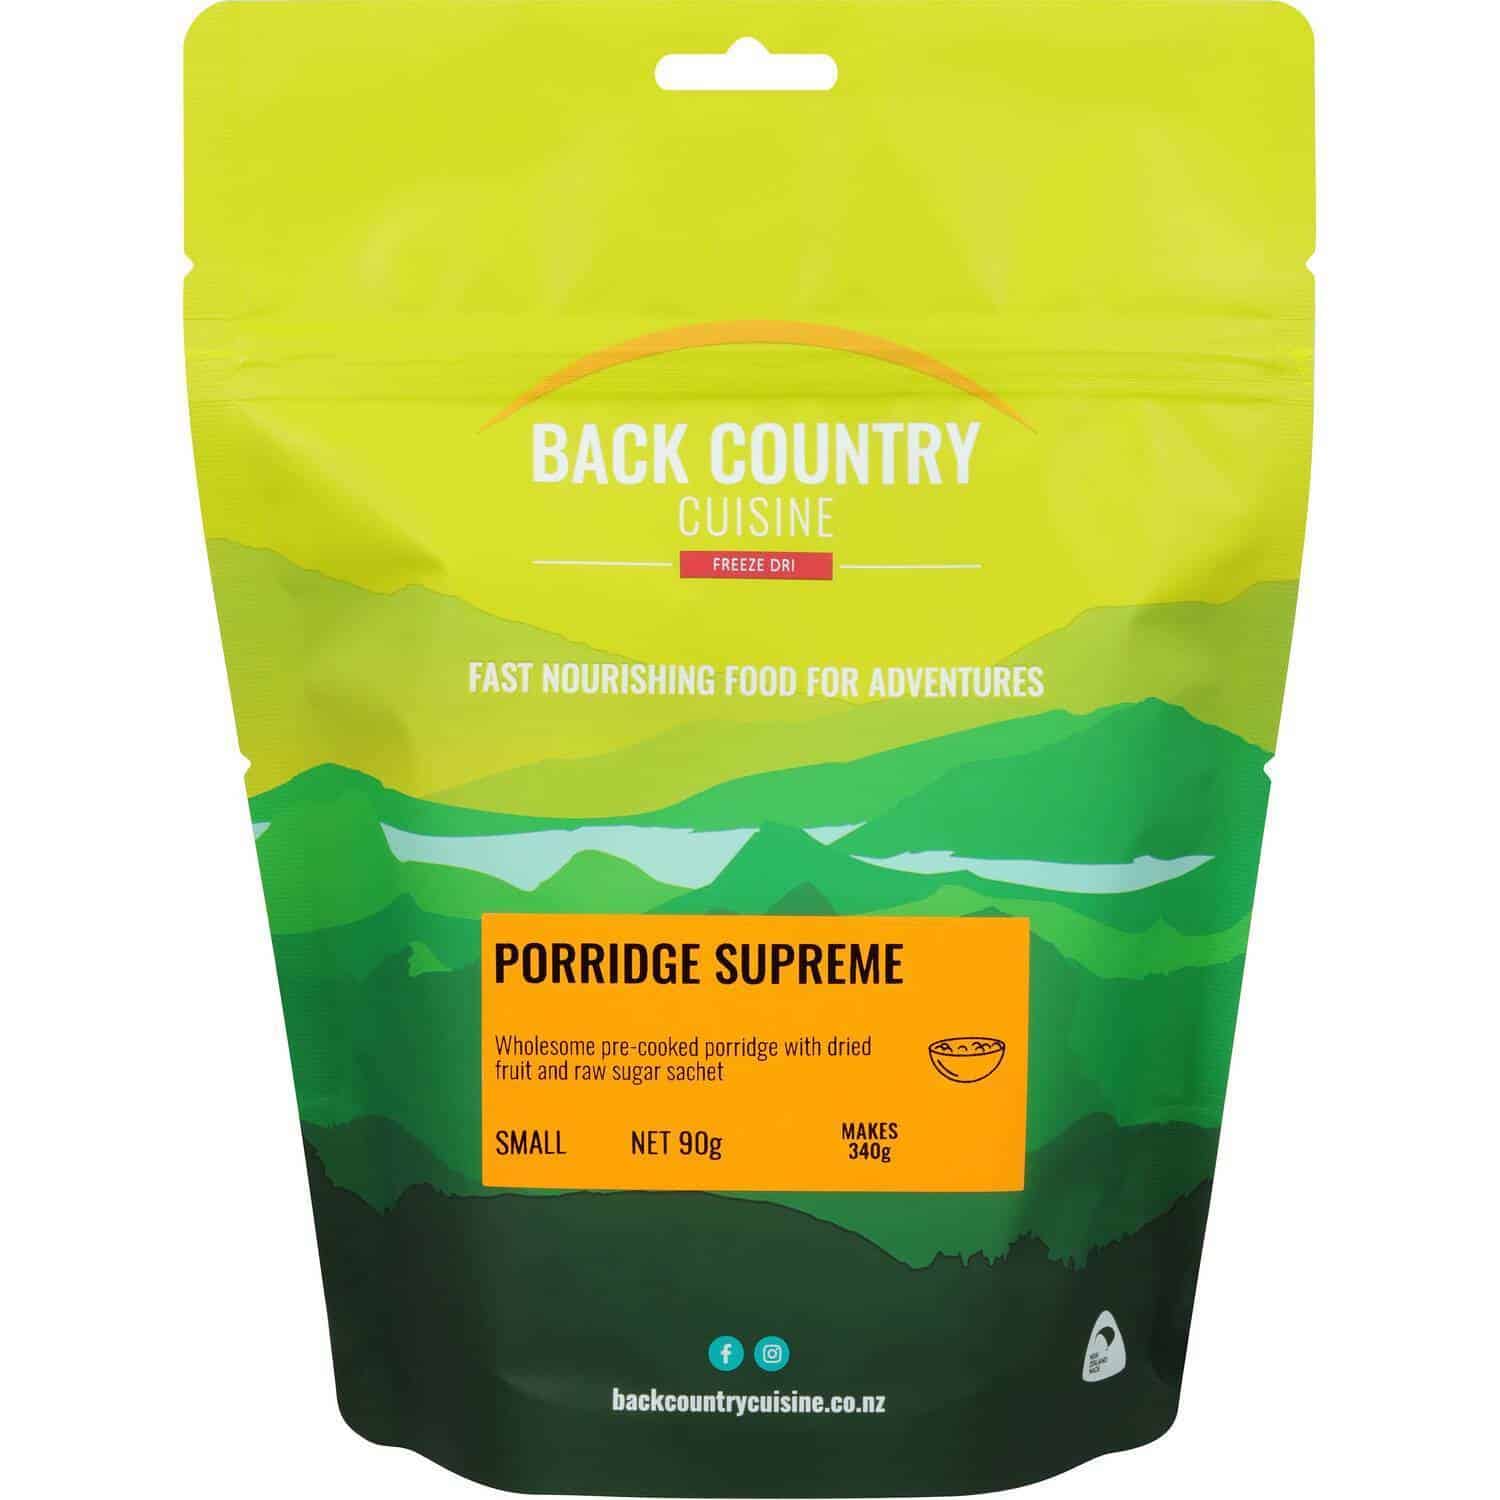 Back Country Cuisine 7 Day Emergency Meal Bucket 1 Person - Tramping Food and Accessories sold by Venture Outdoors NZ